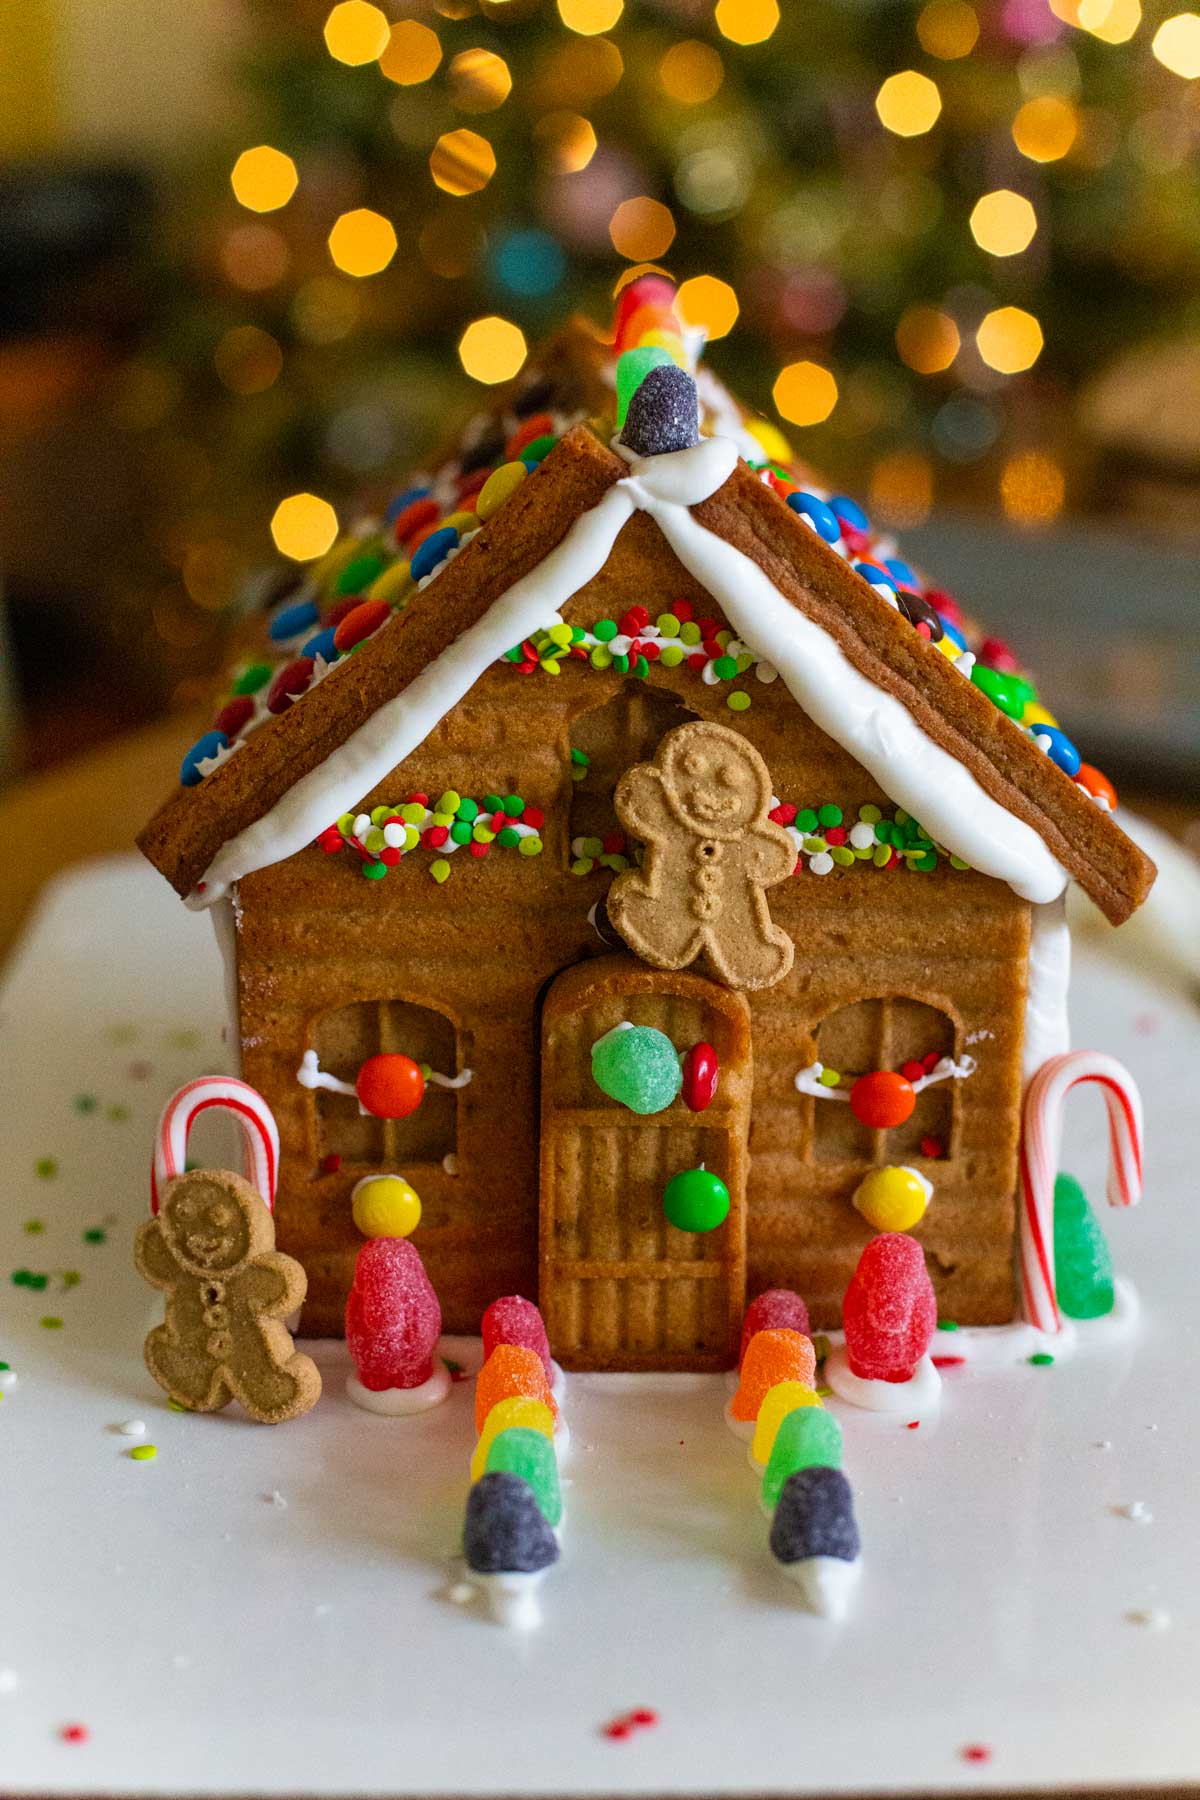 Another example of how to decorate a gingerbread house has a gumdrop pathway and dancing gingerbread boy cookies.